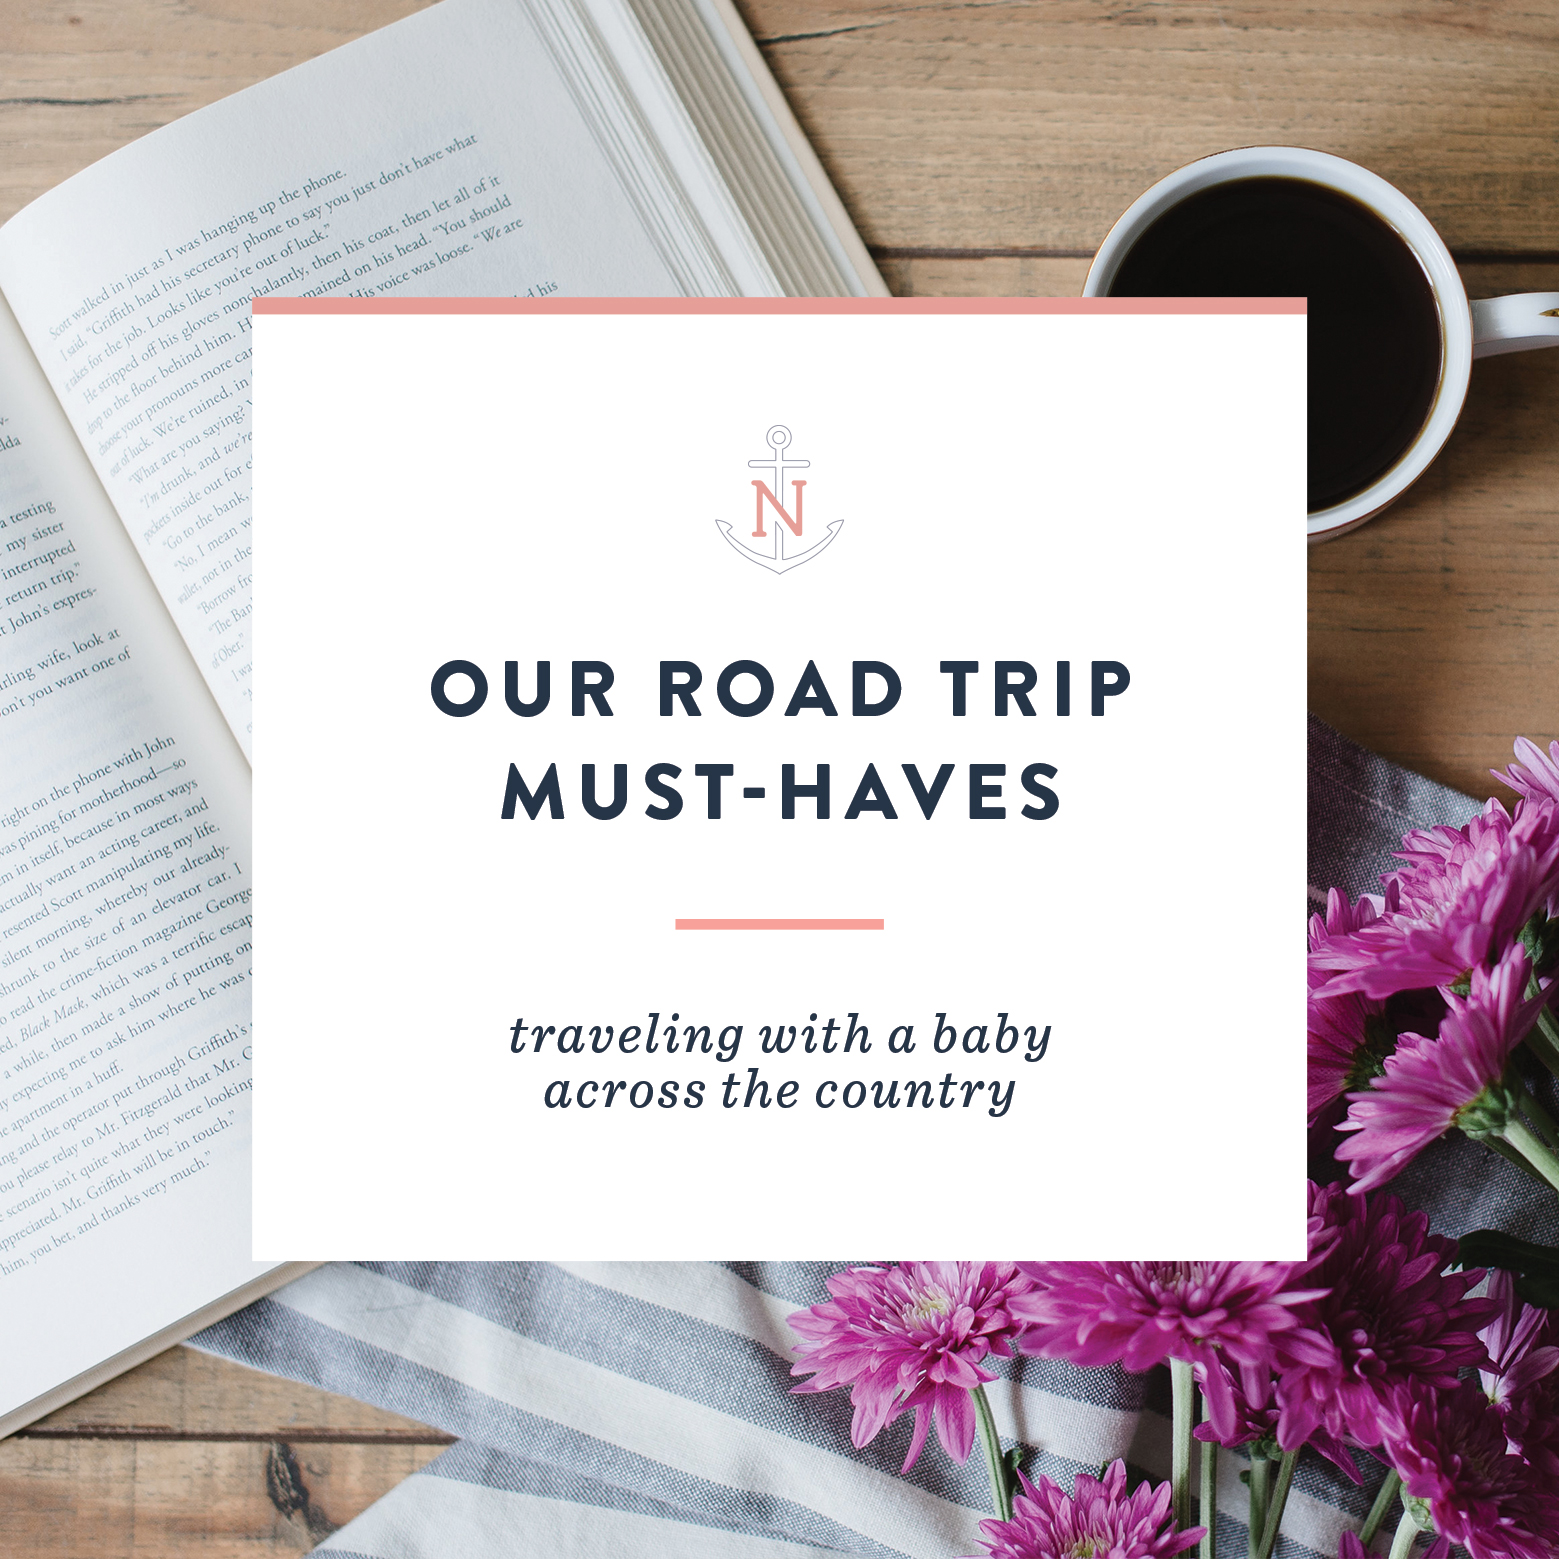 Road Trip with a Baby: Travel items you need when driving cross-country with an infant or toddler